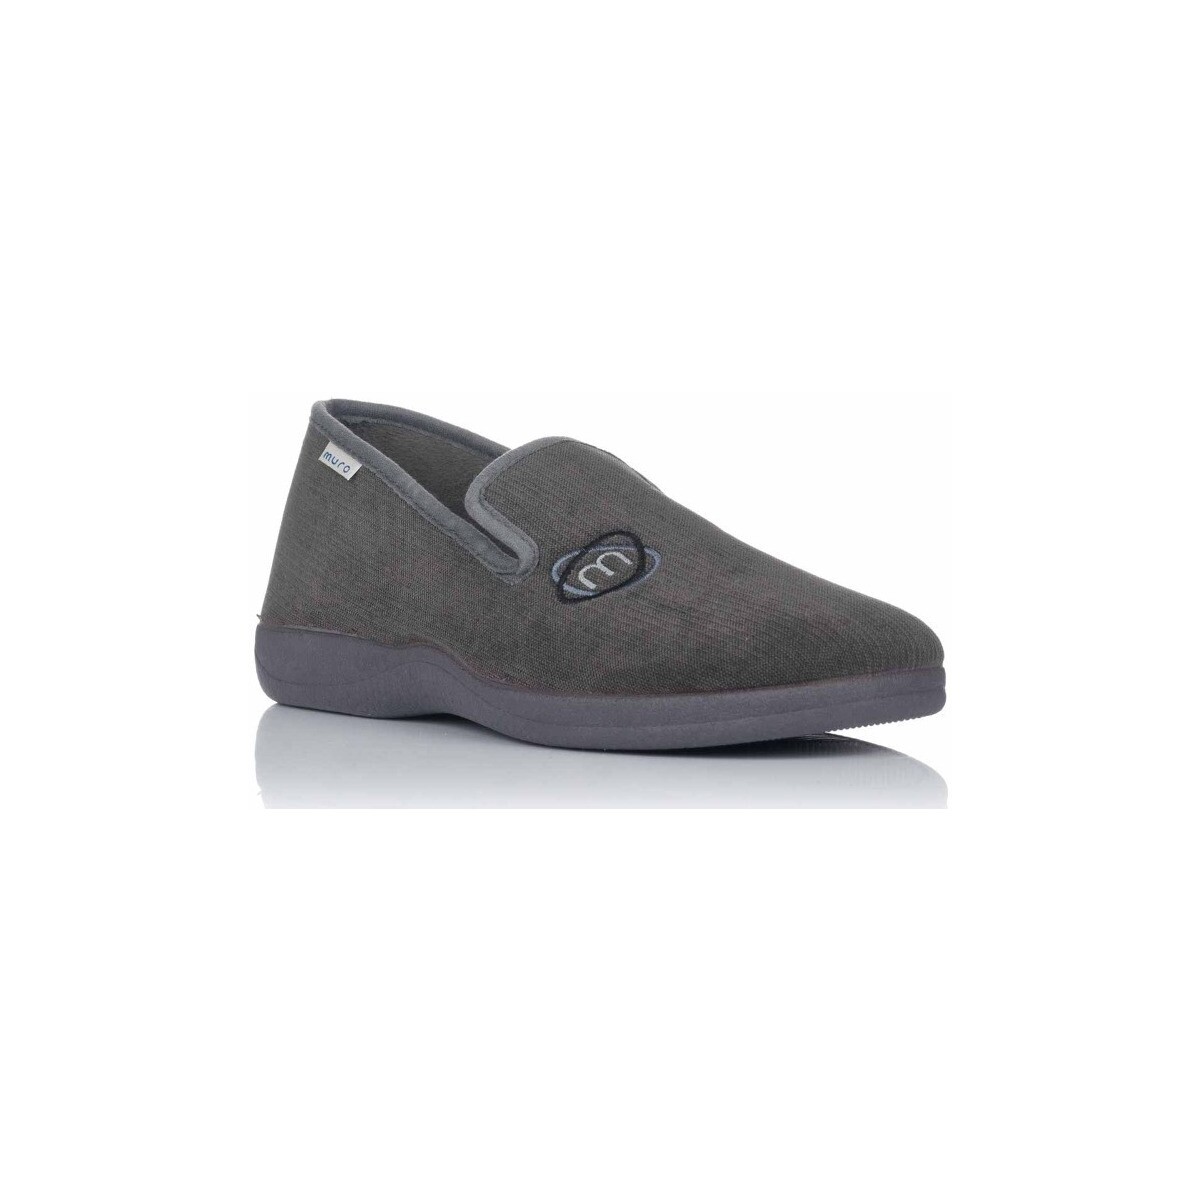 Chaussures Homme Chaussons Muro 5905 Gris